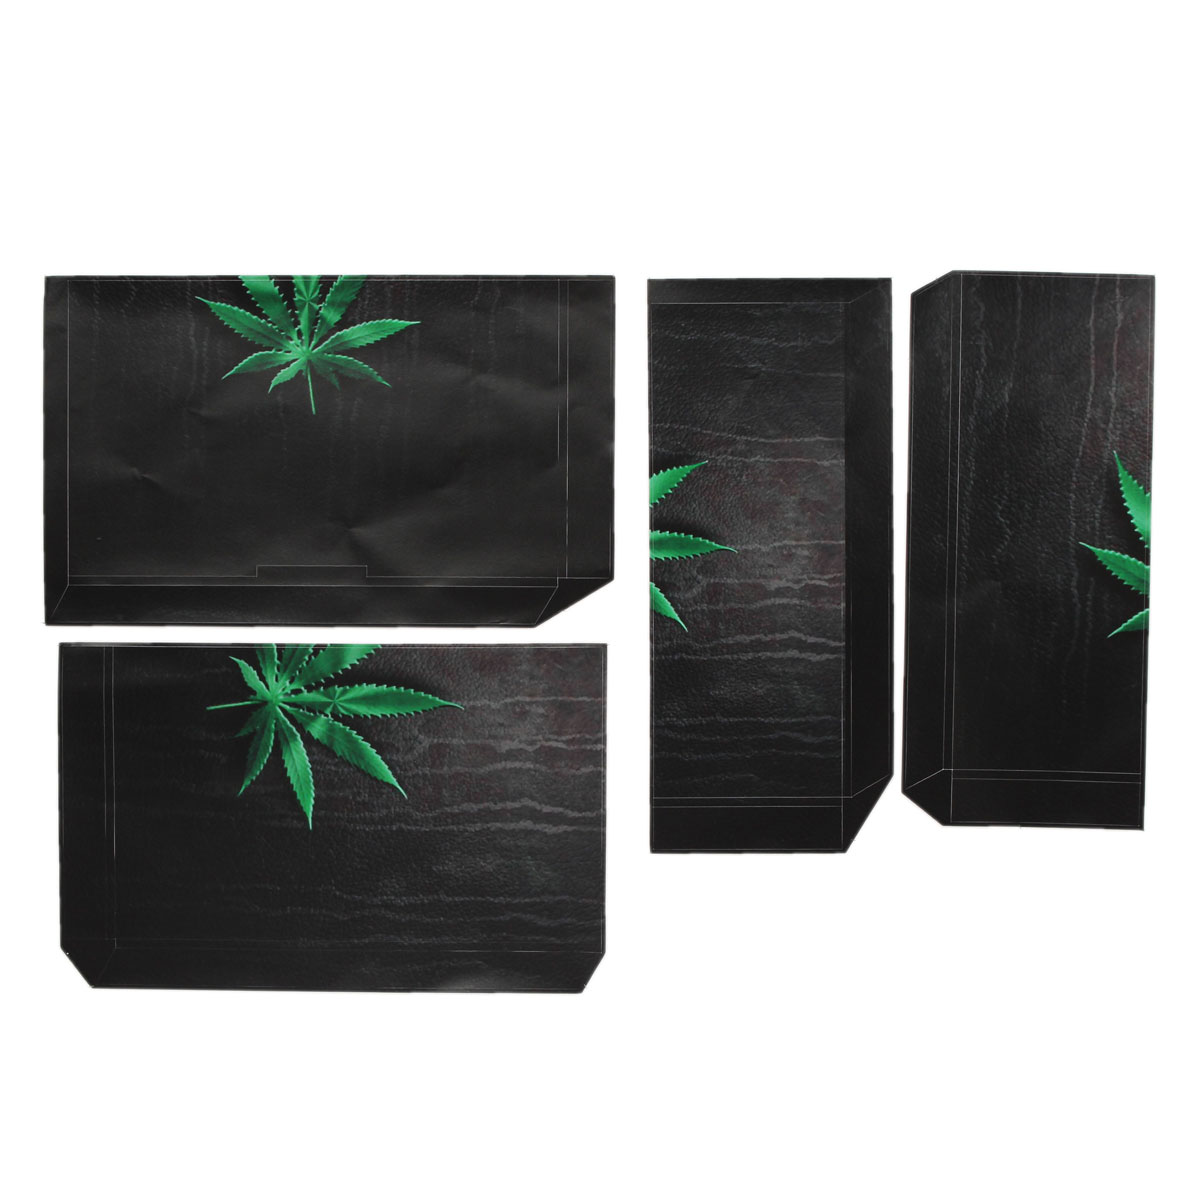 

Weed Smoker Skin Sticker Cover for PS4 4 Console Decal Set Vinyl